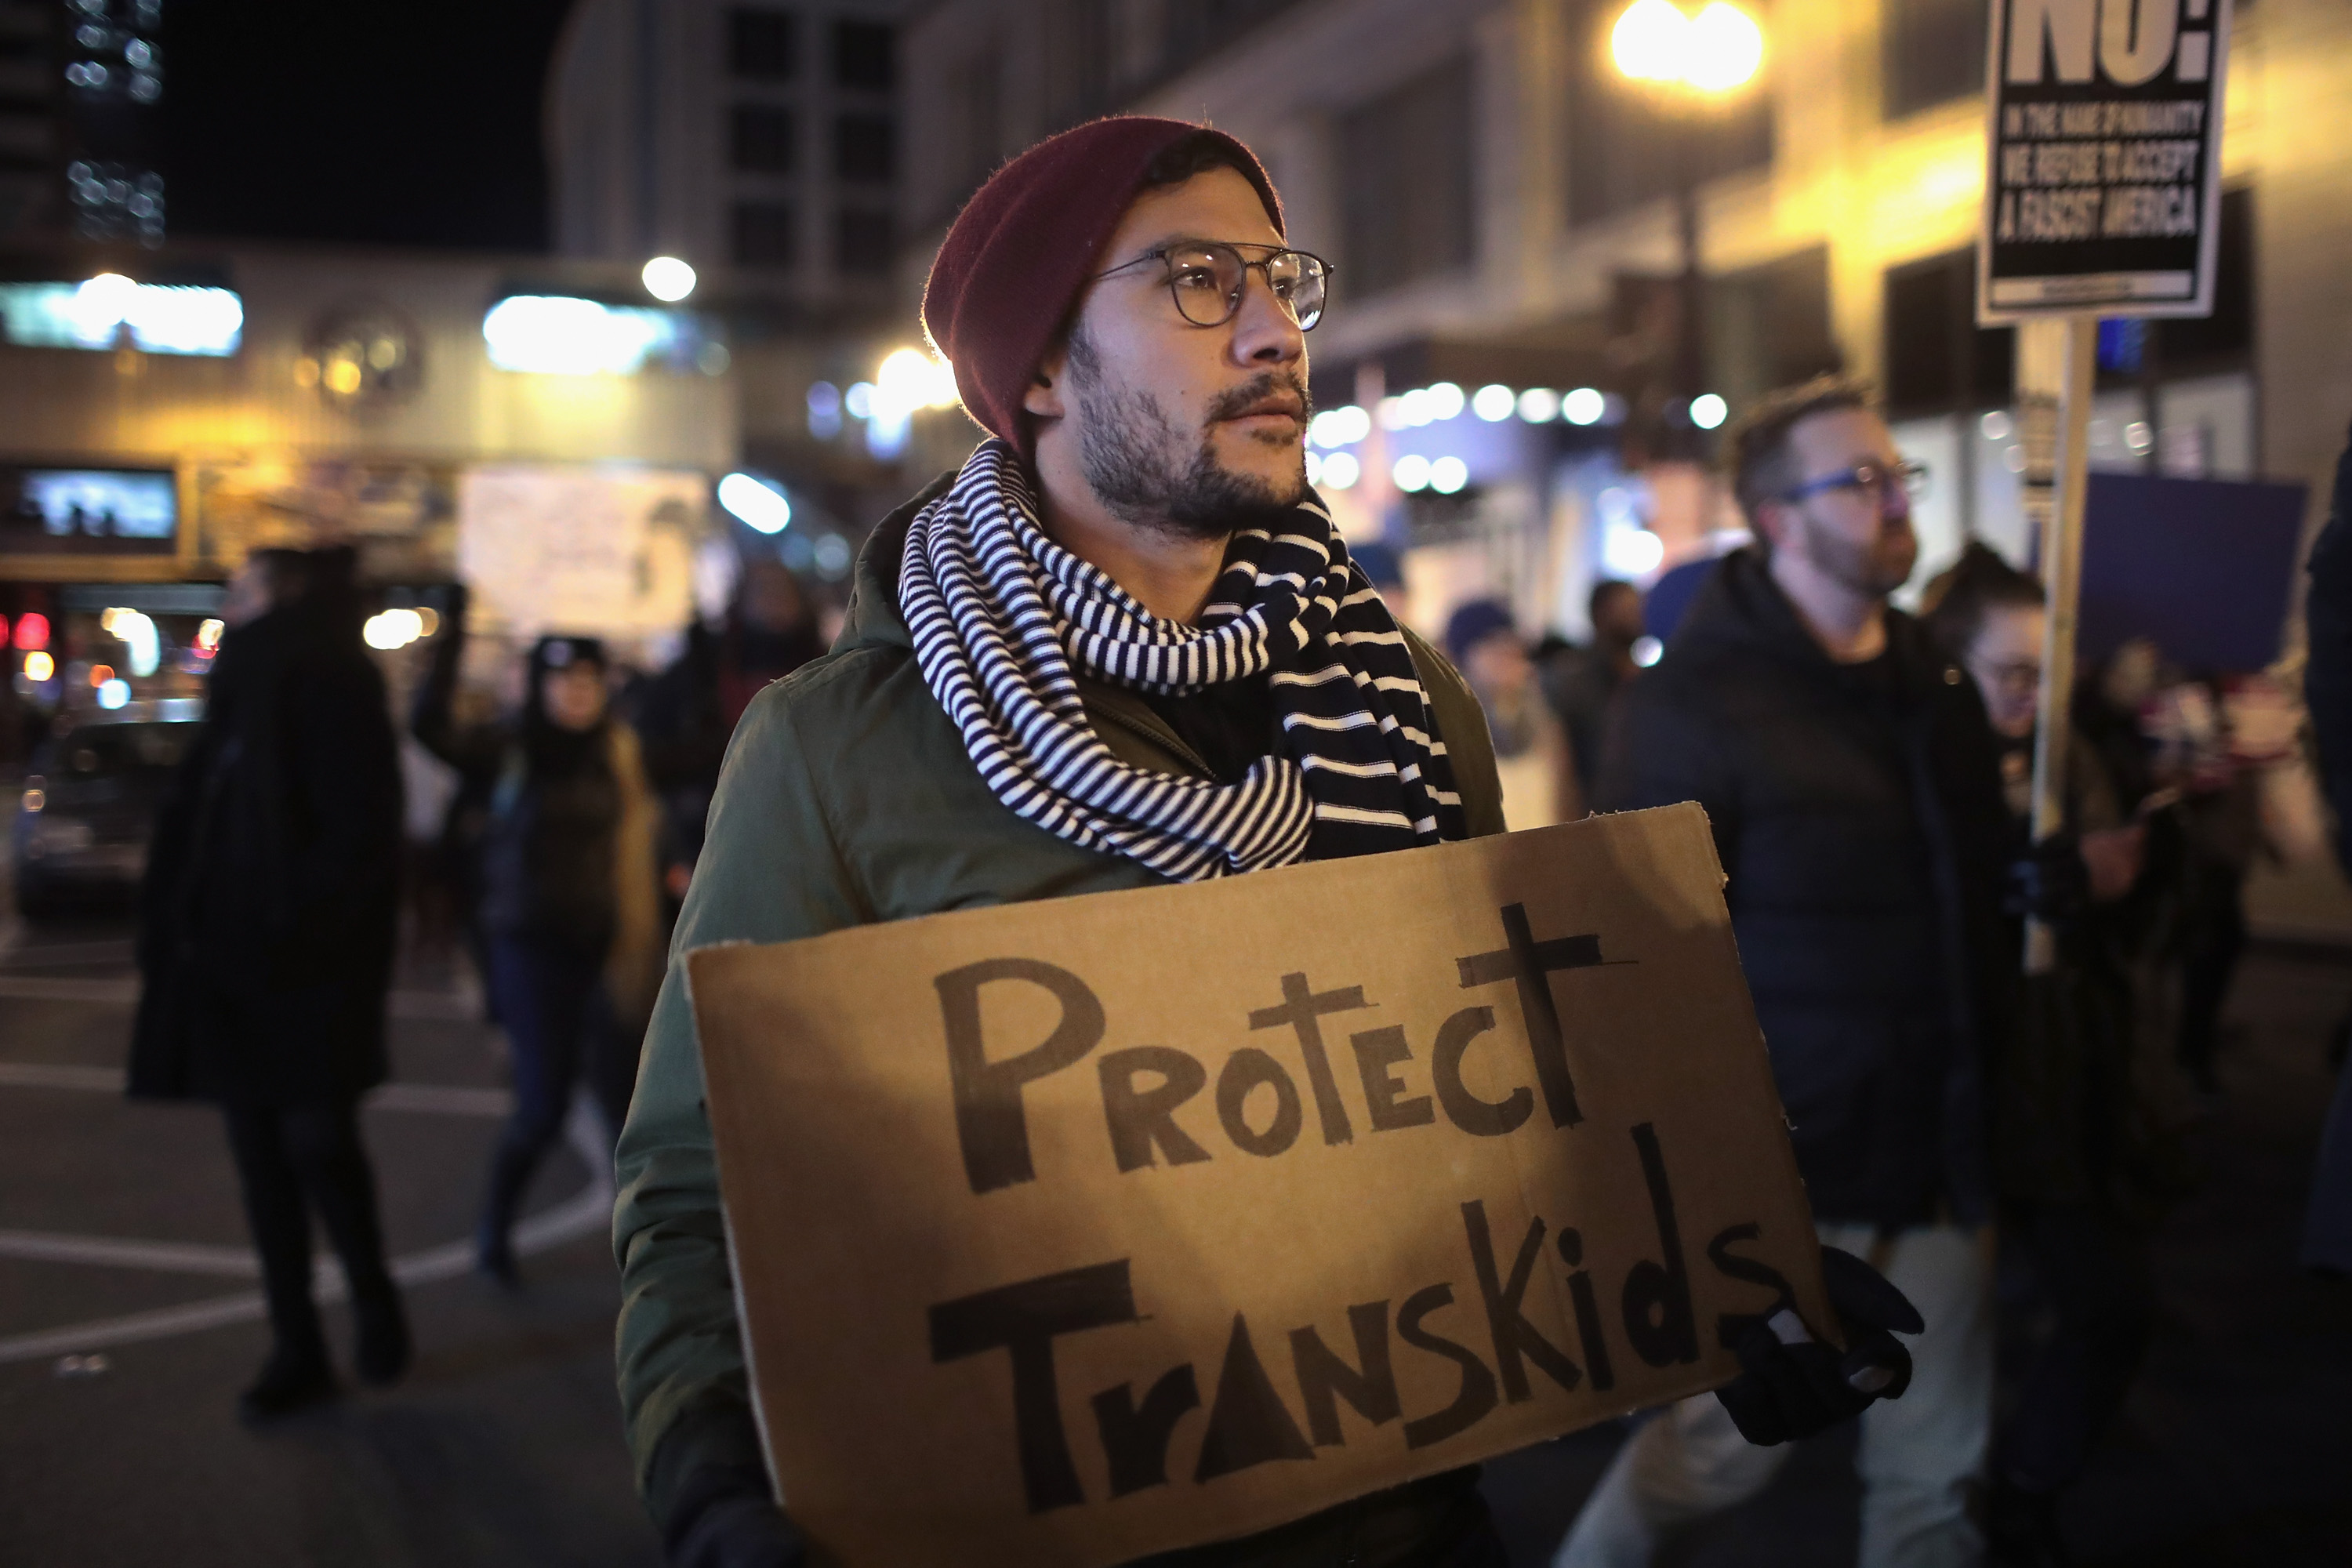 Demonstrators protest for transgender rights with a rally, march through the Loop and a candlelight vigil to remember transgender friends lost to murder and suicide on March 3, 2017 in Chicago, Illinois. (Scott Olson/Getty Images)